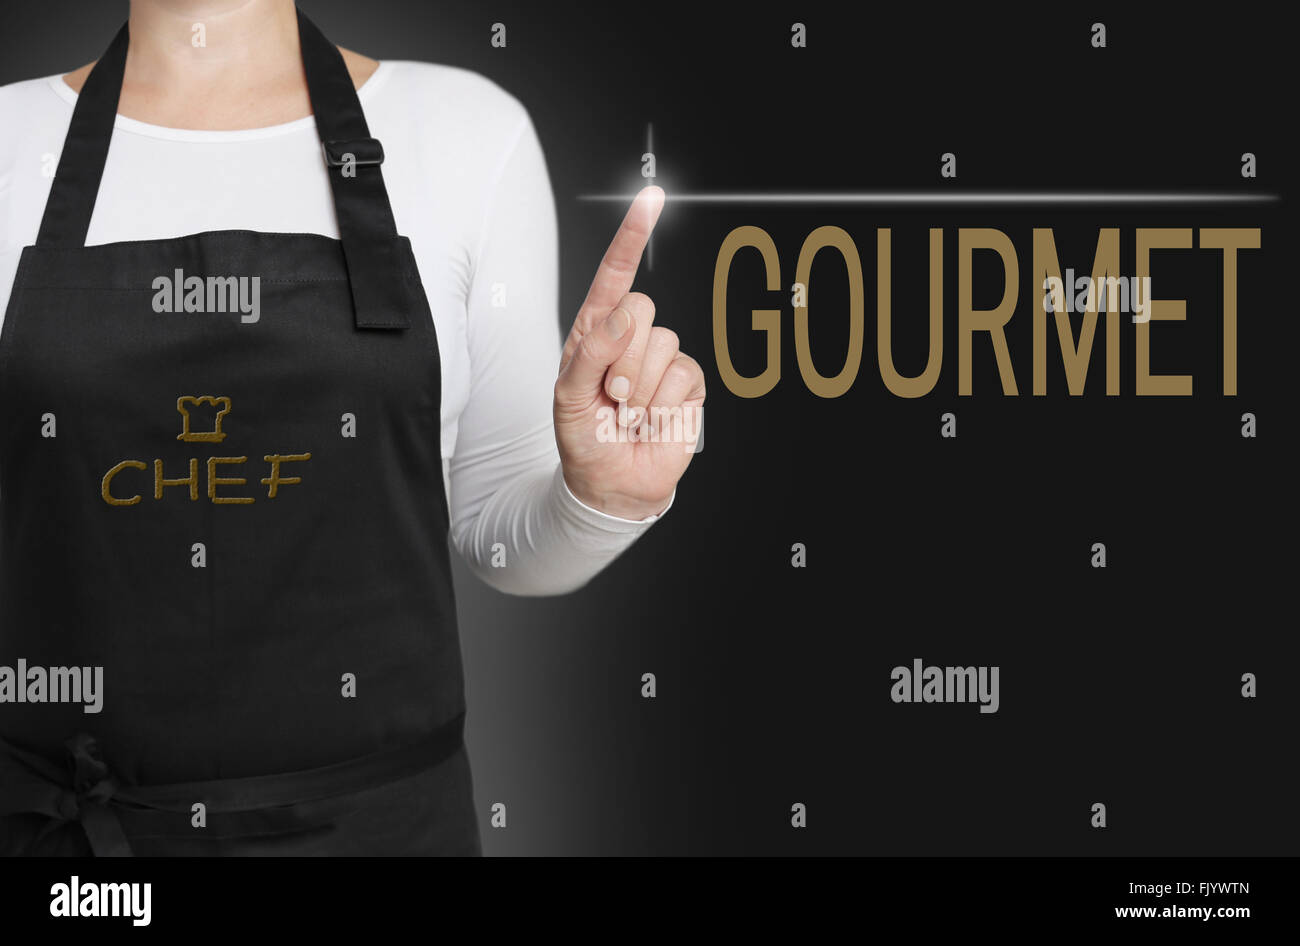 gourmet touchscreen is operated by chef. Stock Photo